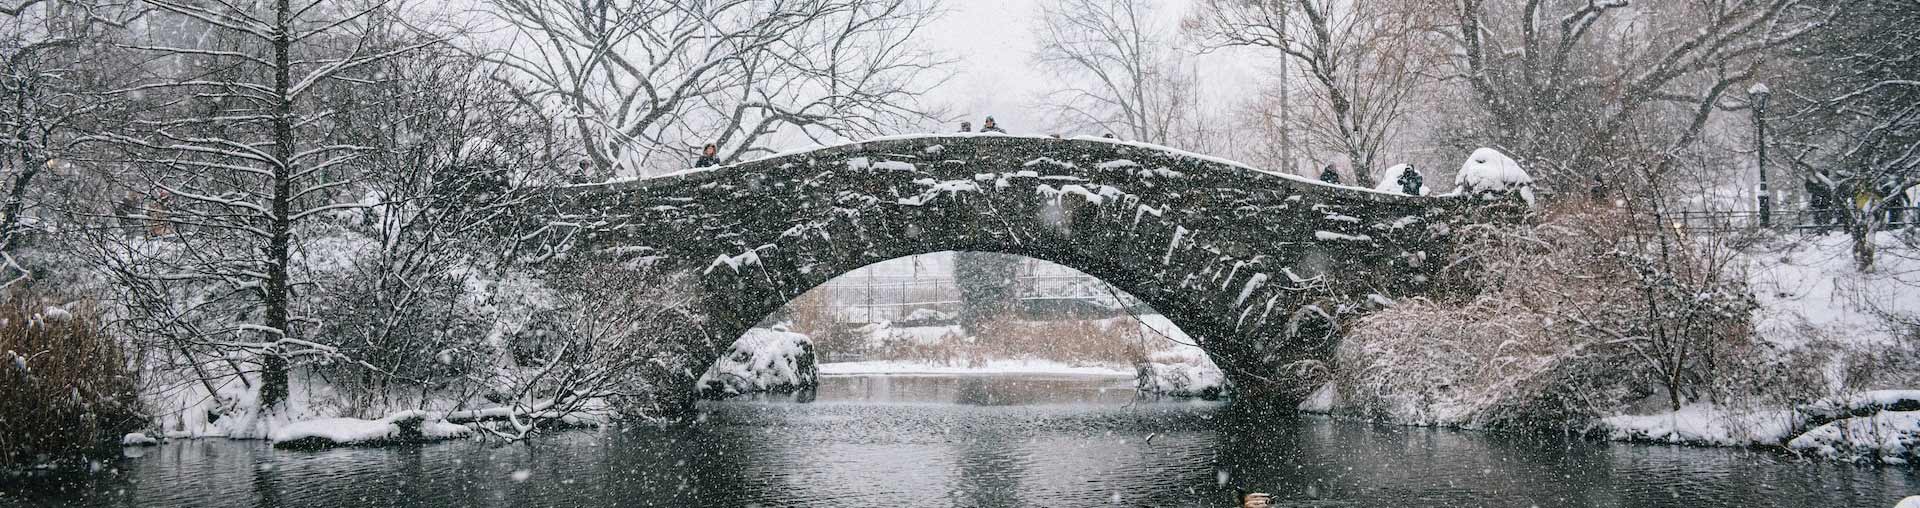 Central Park New York City snowing with stone bridge in background